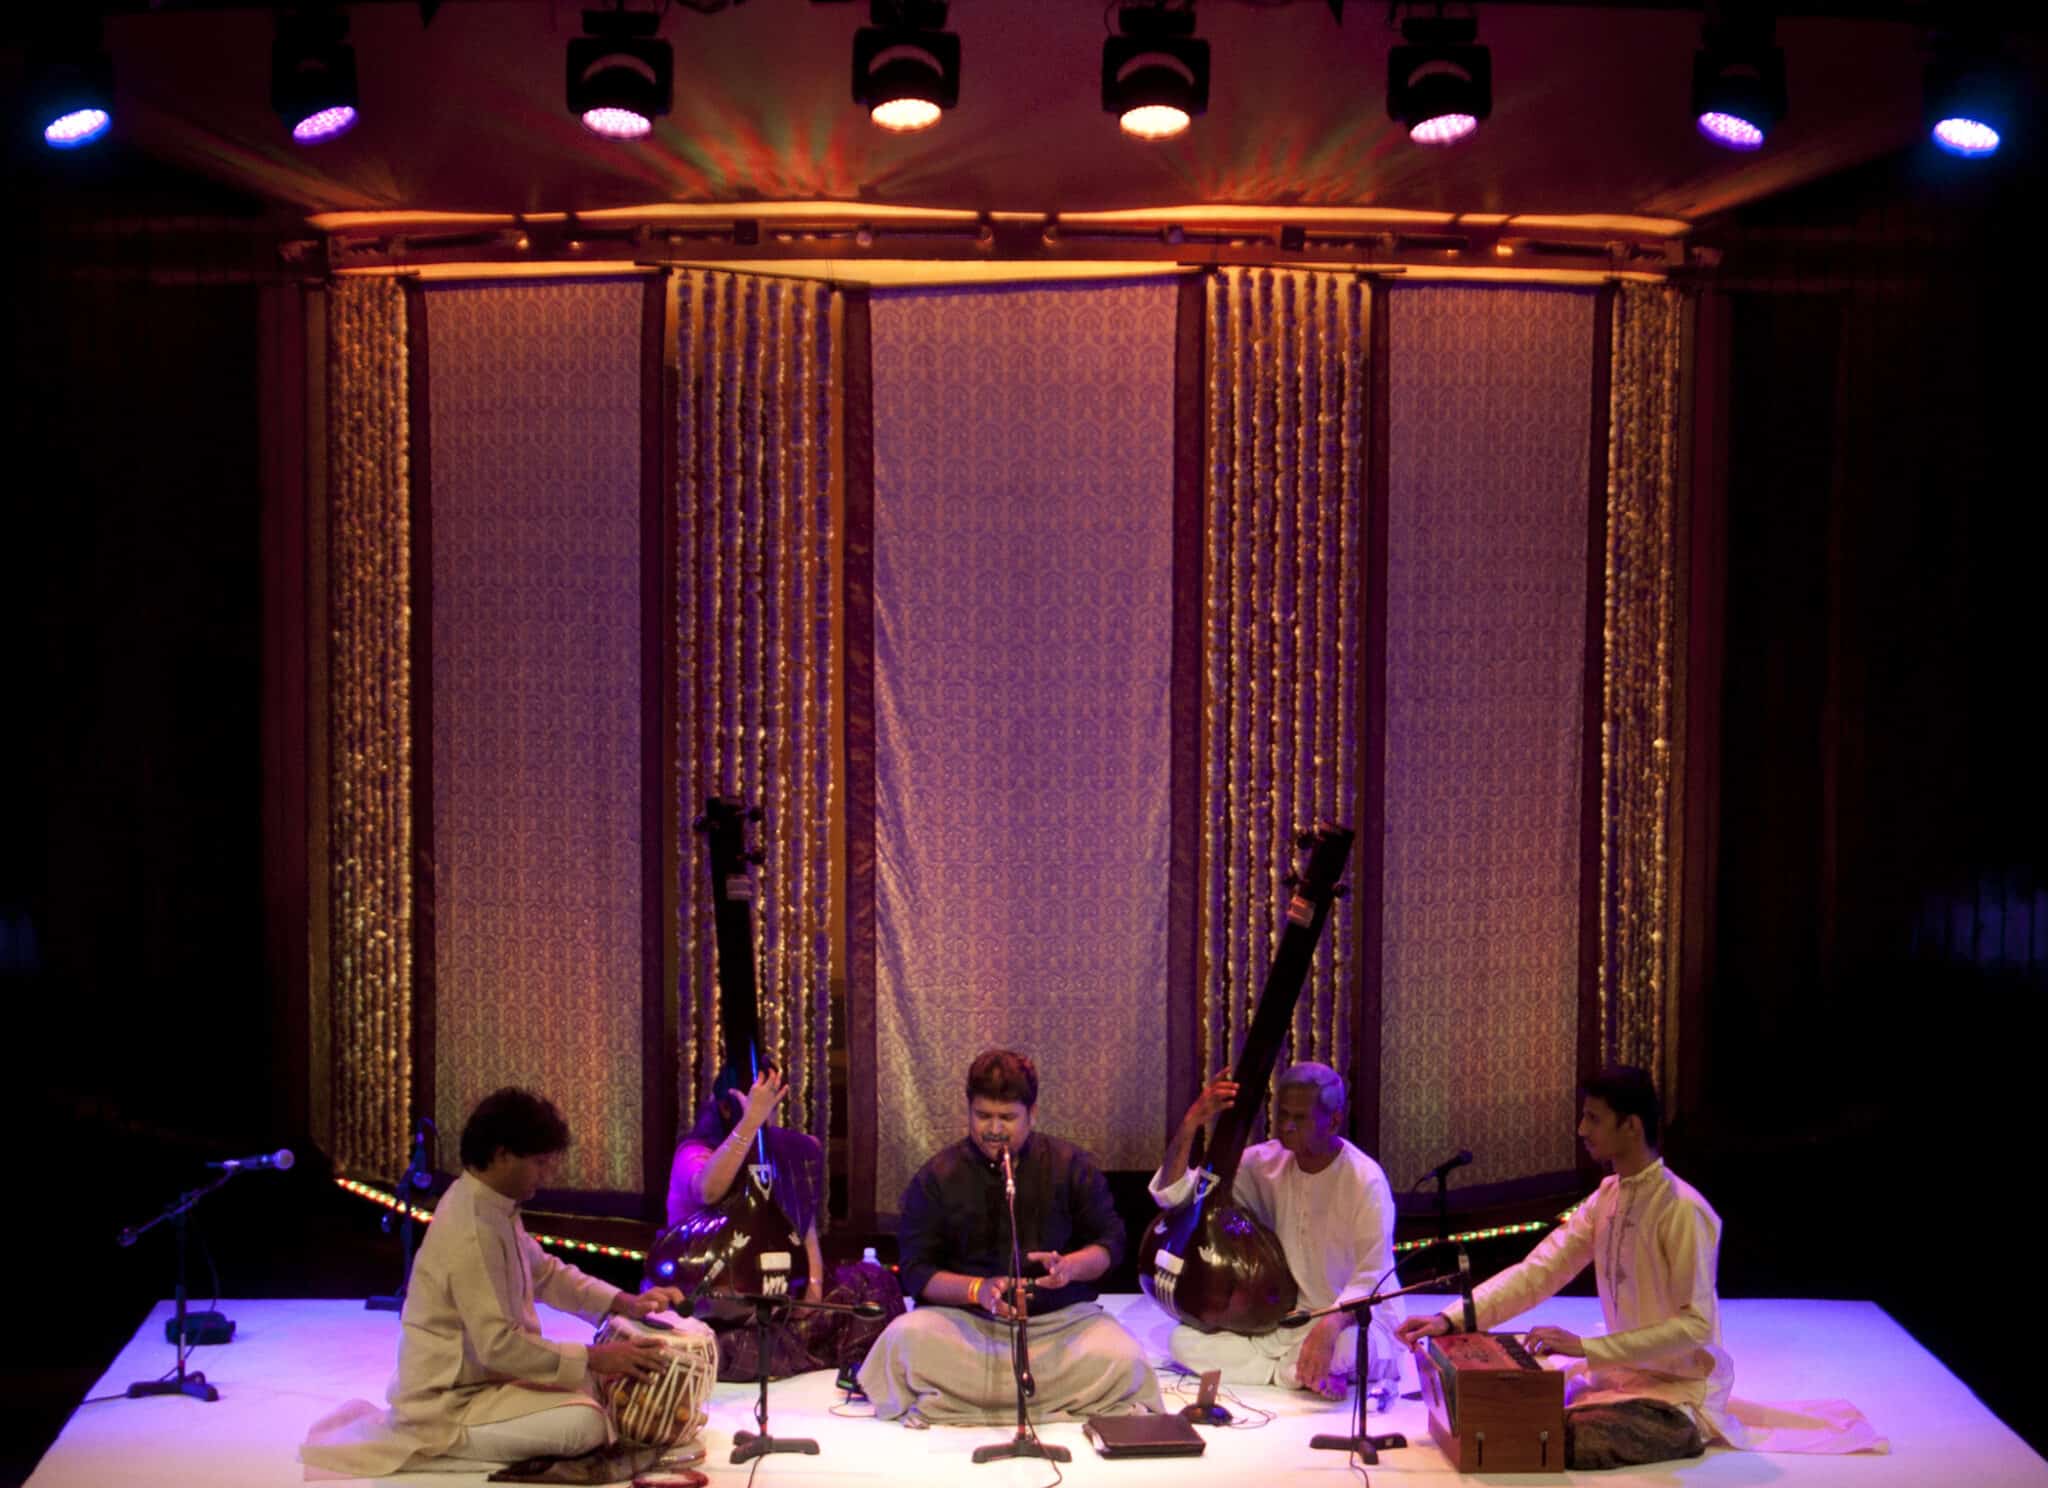 A Hindustani classical vocal recital by Bhuvnesh Komkali at Bandish: a Tribute to Legendary Composers in 2019. Photo: Narendra Dangiya/NCPA Photos